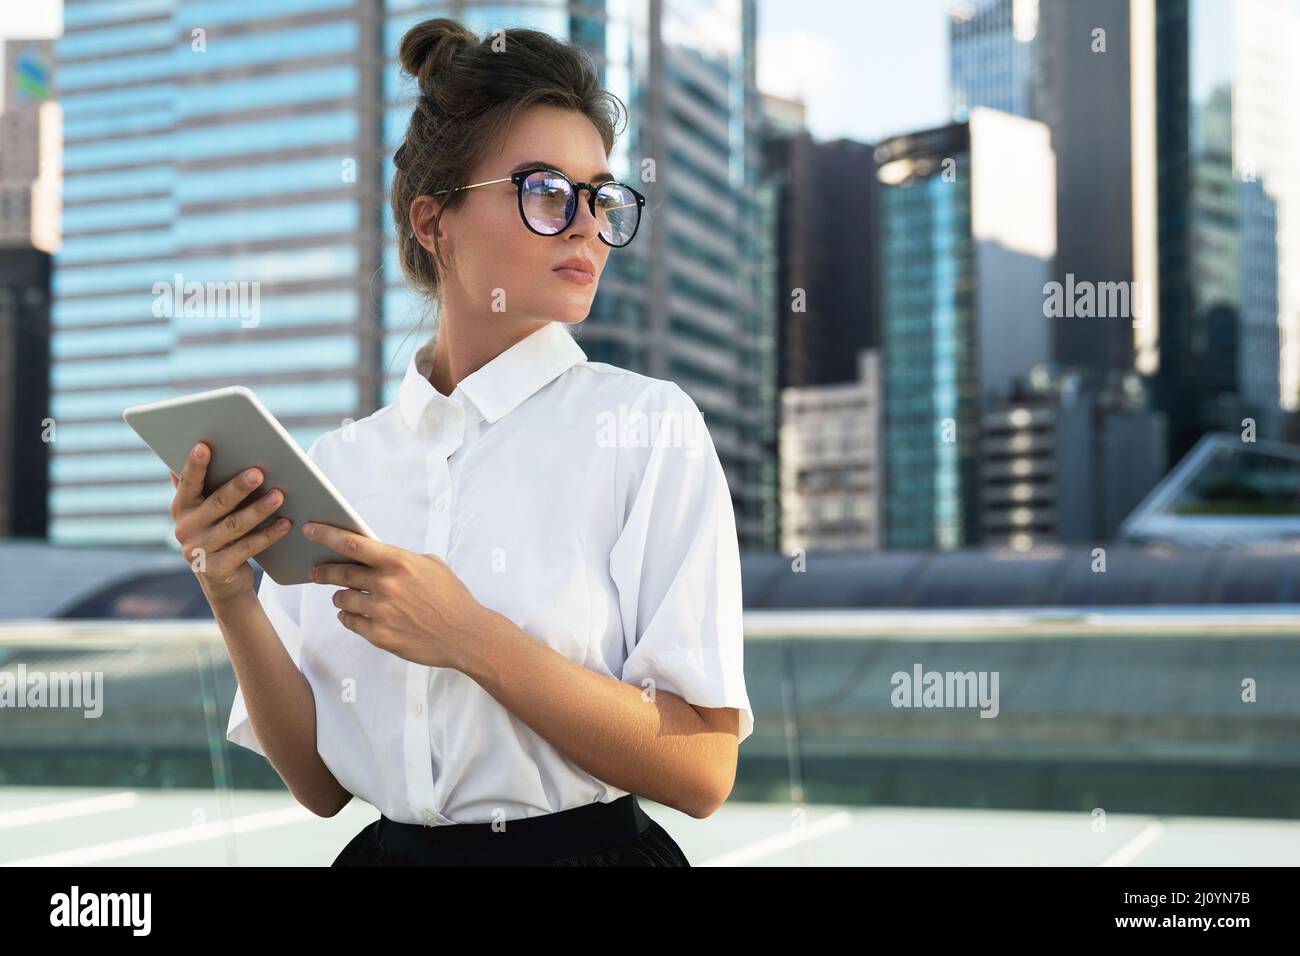 Woman wearing smart casual clothing is using tablet pc Stock Photo